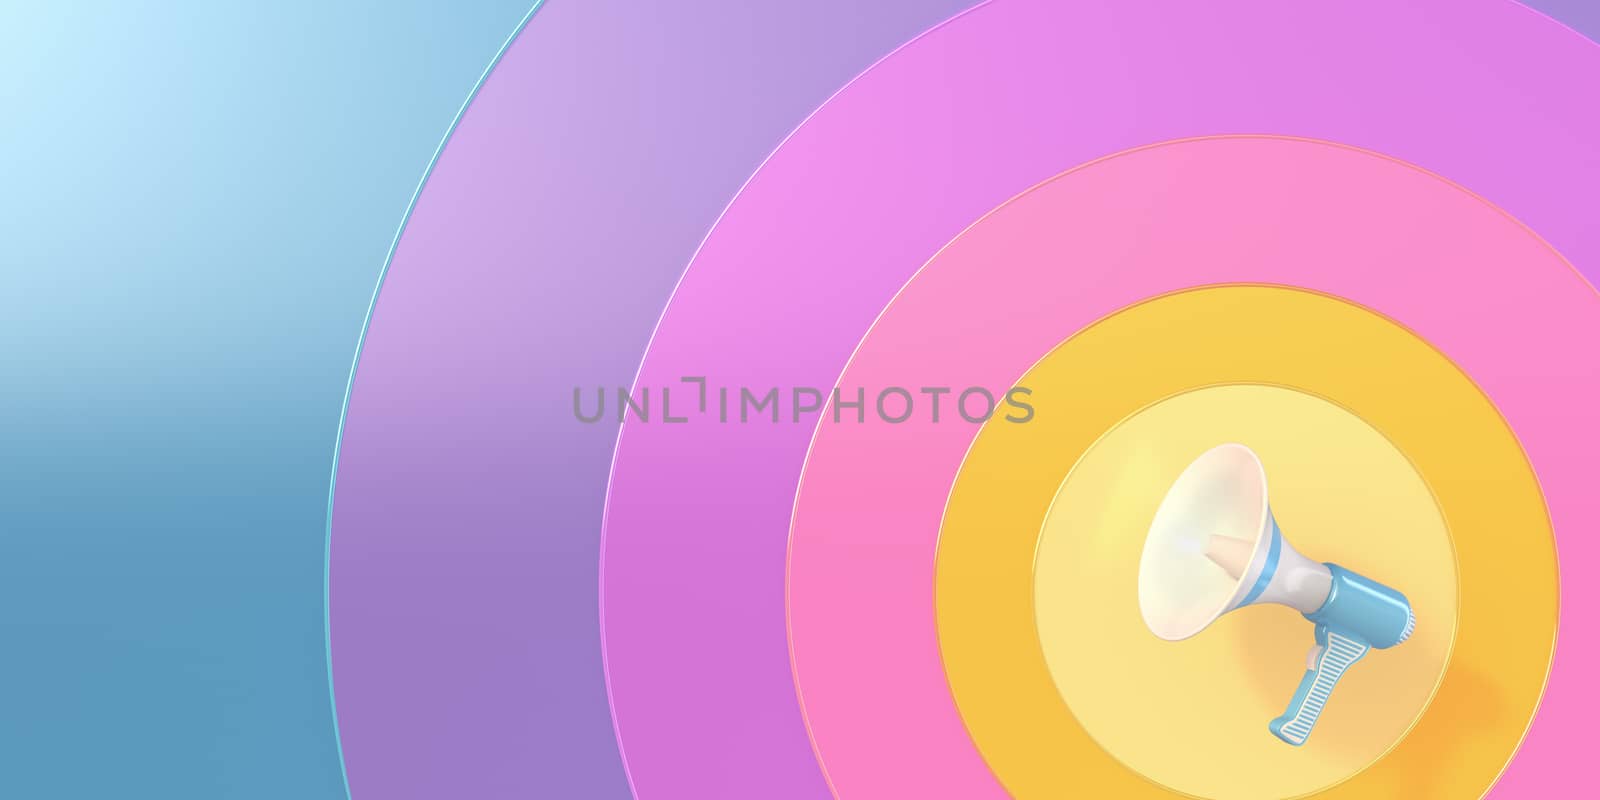 vintage white blue  Megaphone 3d illustrator graphic in a cycle signal radio wave retro concept pastel color background for announcing, news, report. widescreen wallpaper. summer sunny season idea.